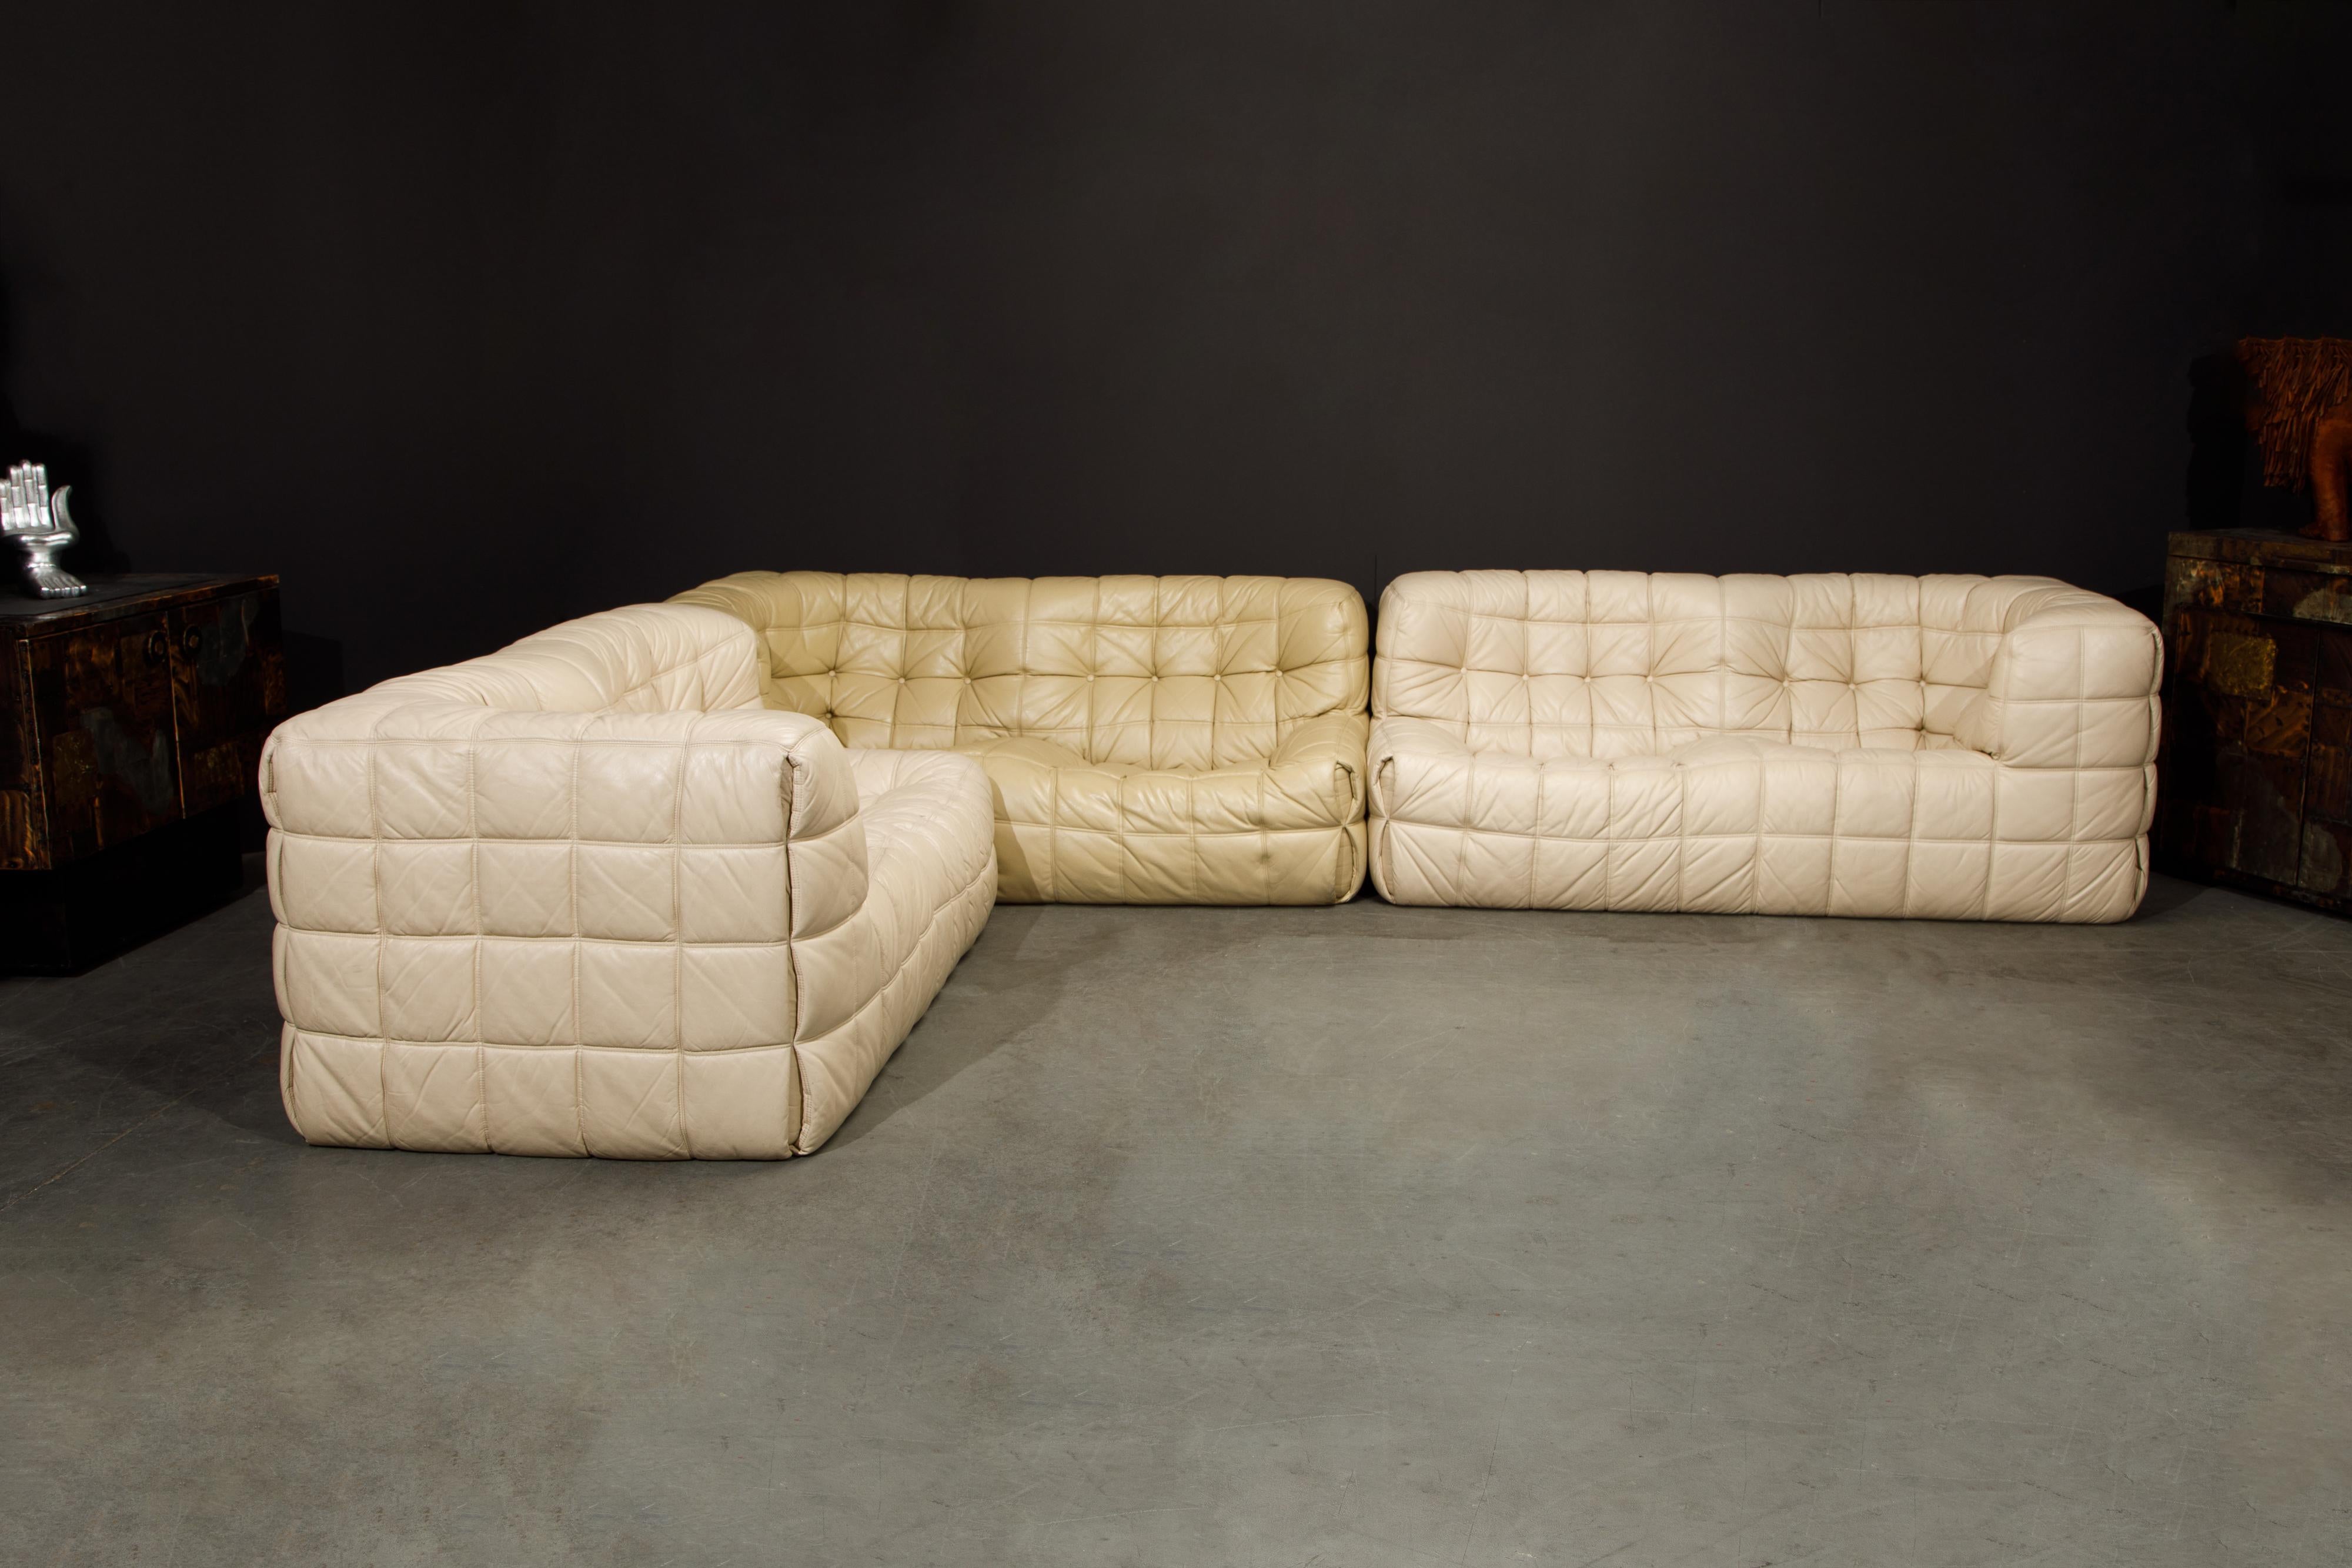 French 'Kashima' Leather Sectional by Michel Ducaroy for Ligne Roset, c. 1976, Signed